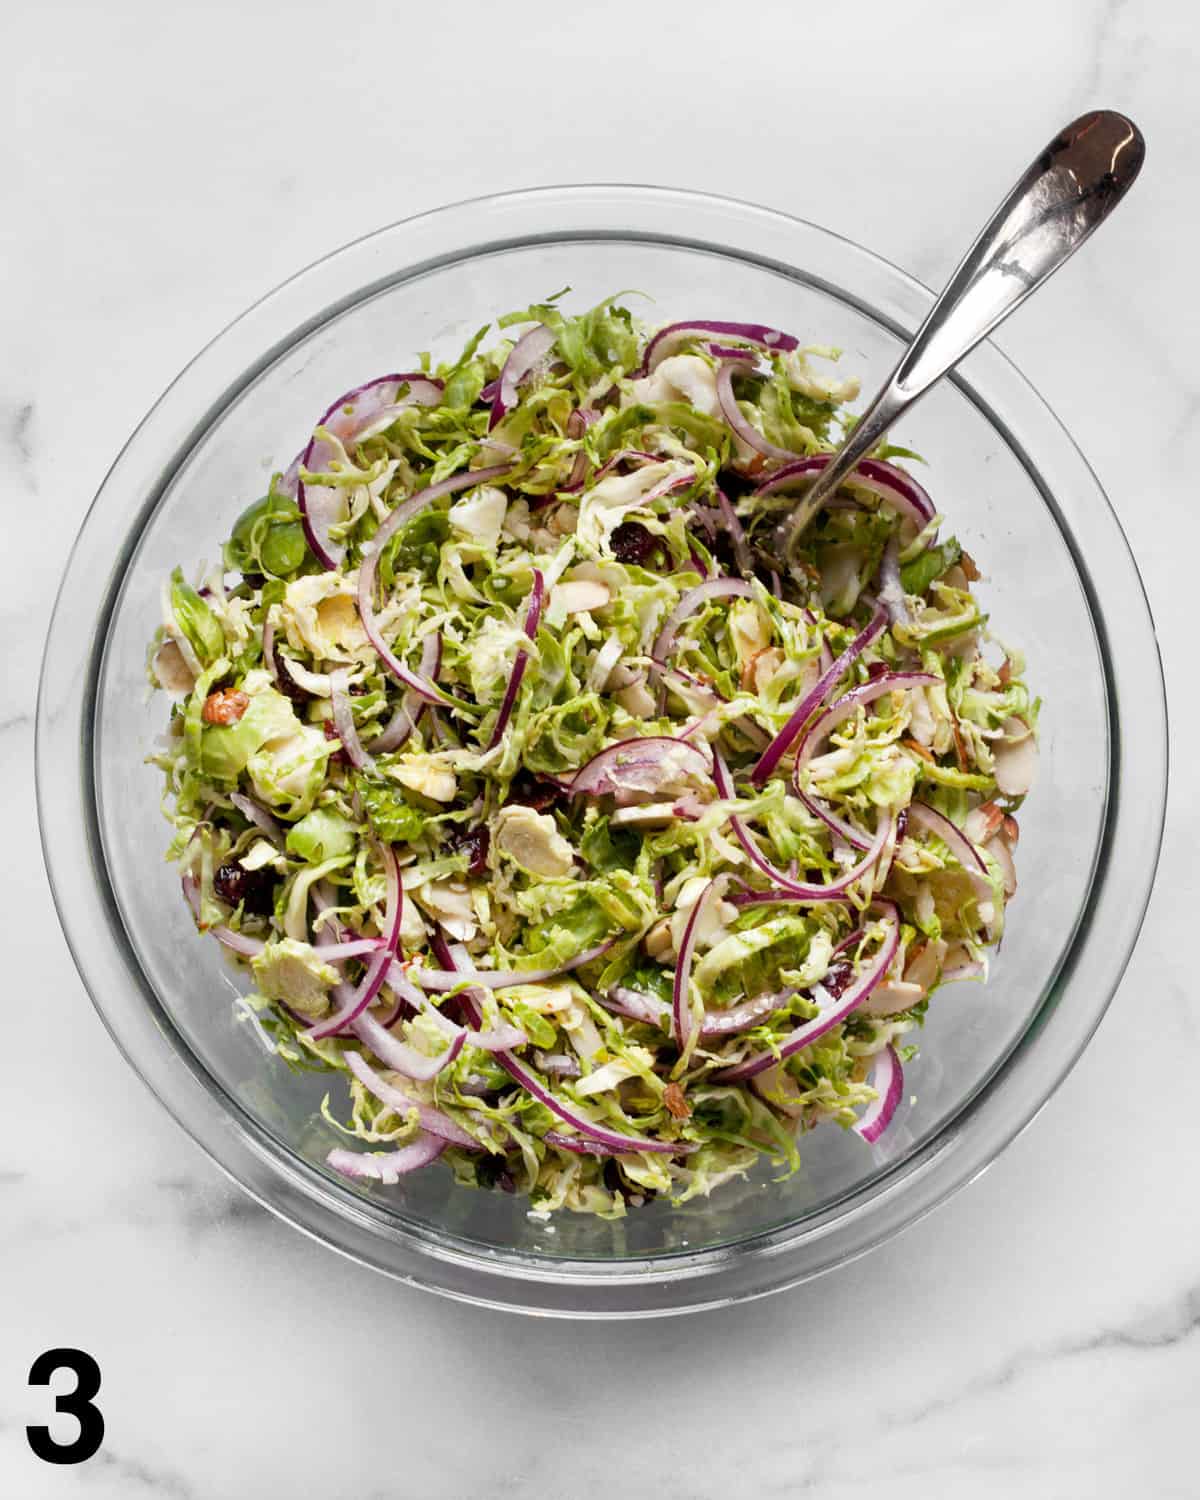 Brussel sprout salad in a bowl tossed with vinaigrette.